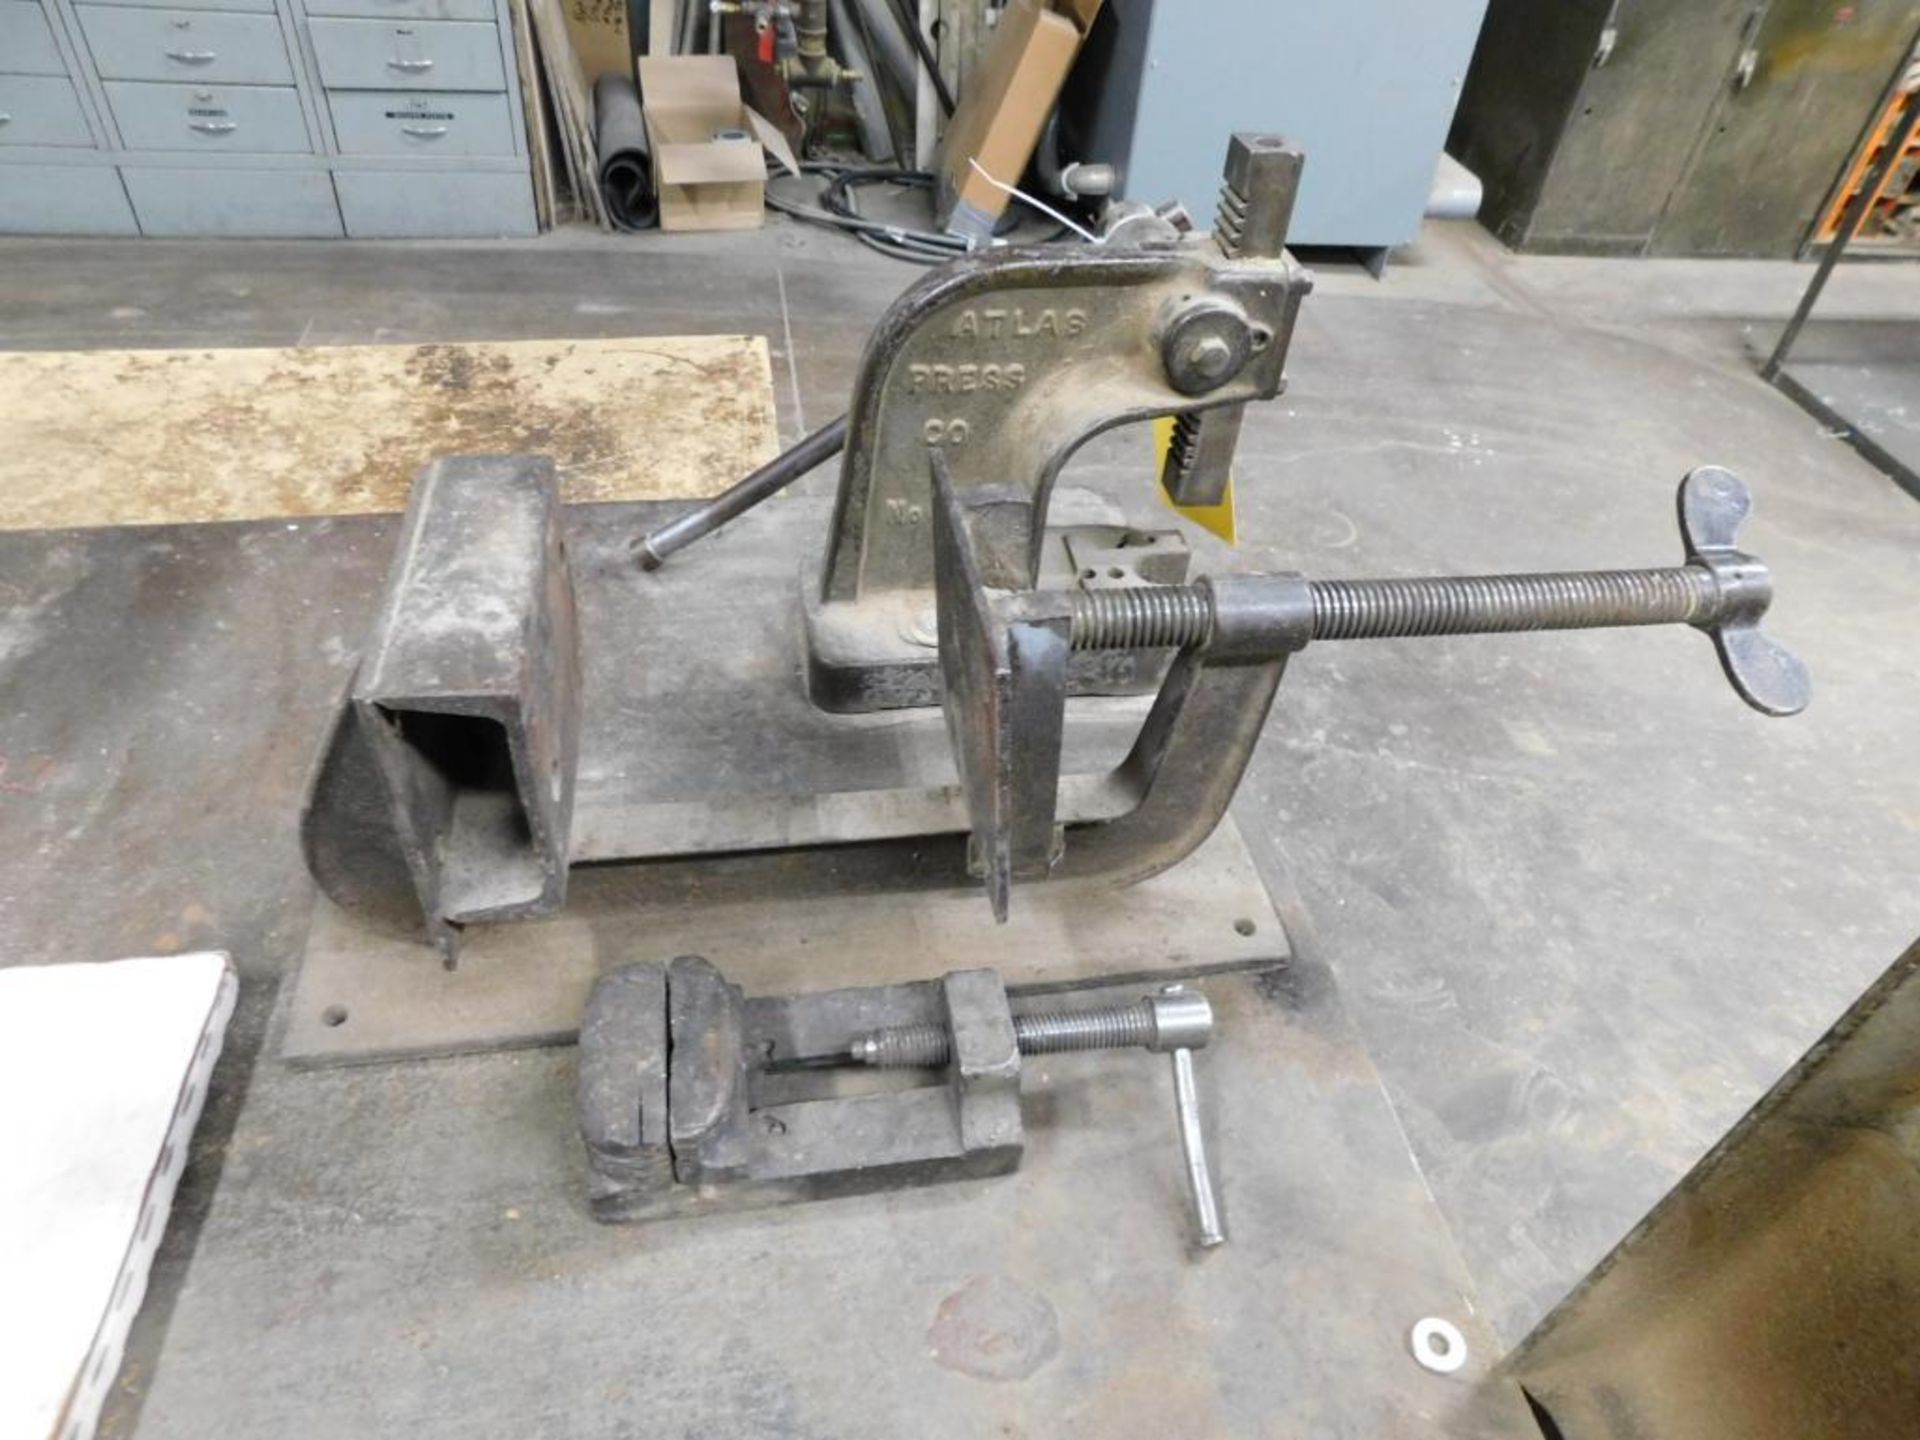 LOT: Fabrication Table w/6" Jaw Morgan Vise, Small Arbor Press, Balancing Stand, Assorted Saw Blades - Image 3 of 10